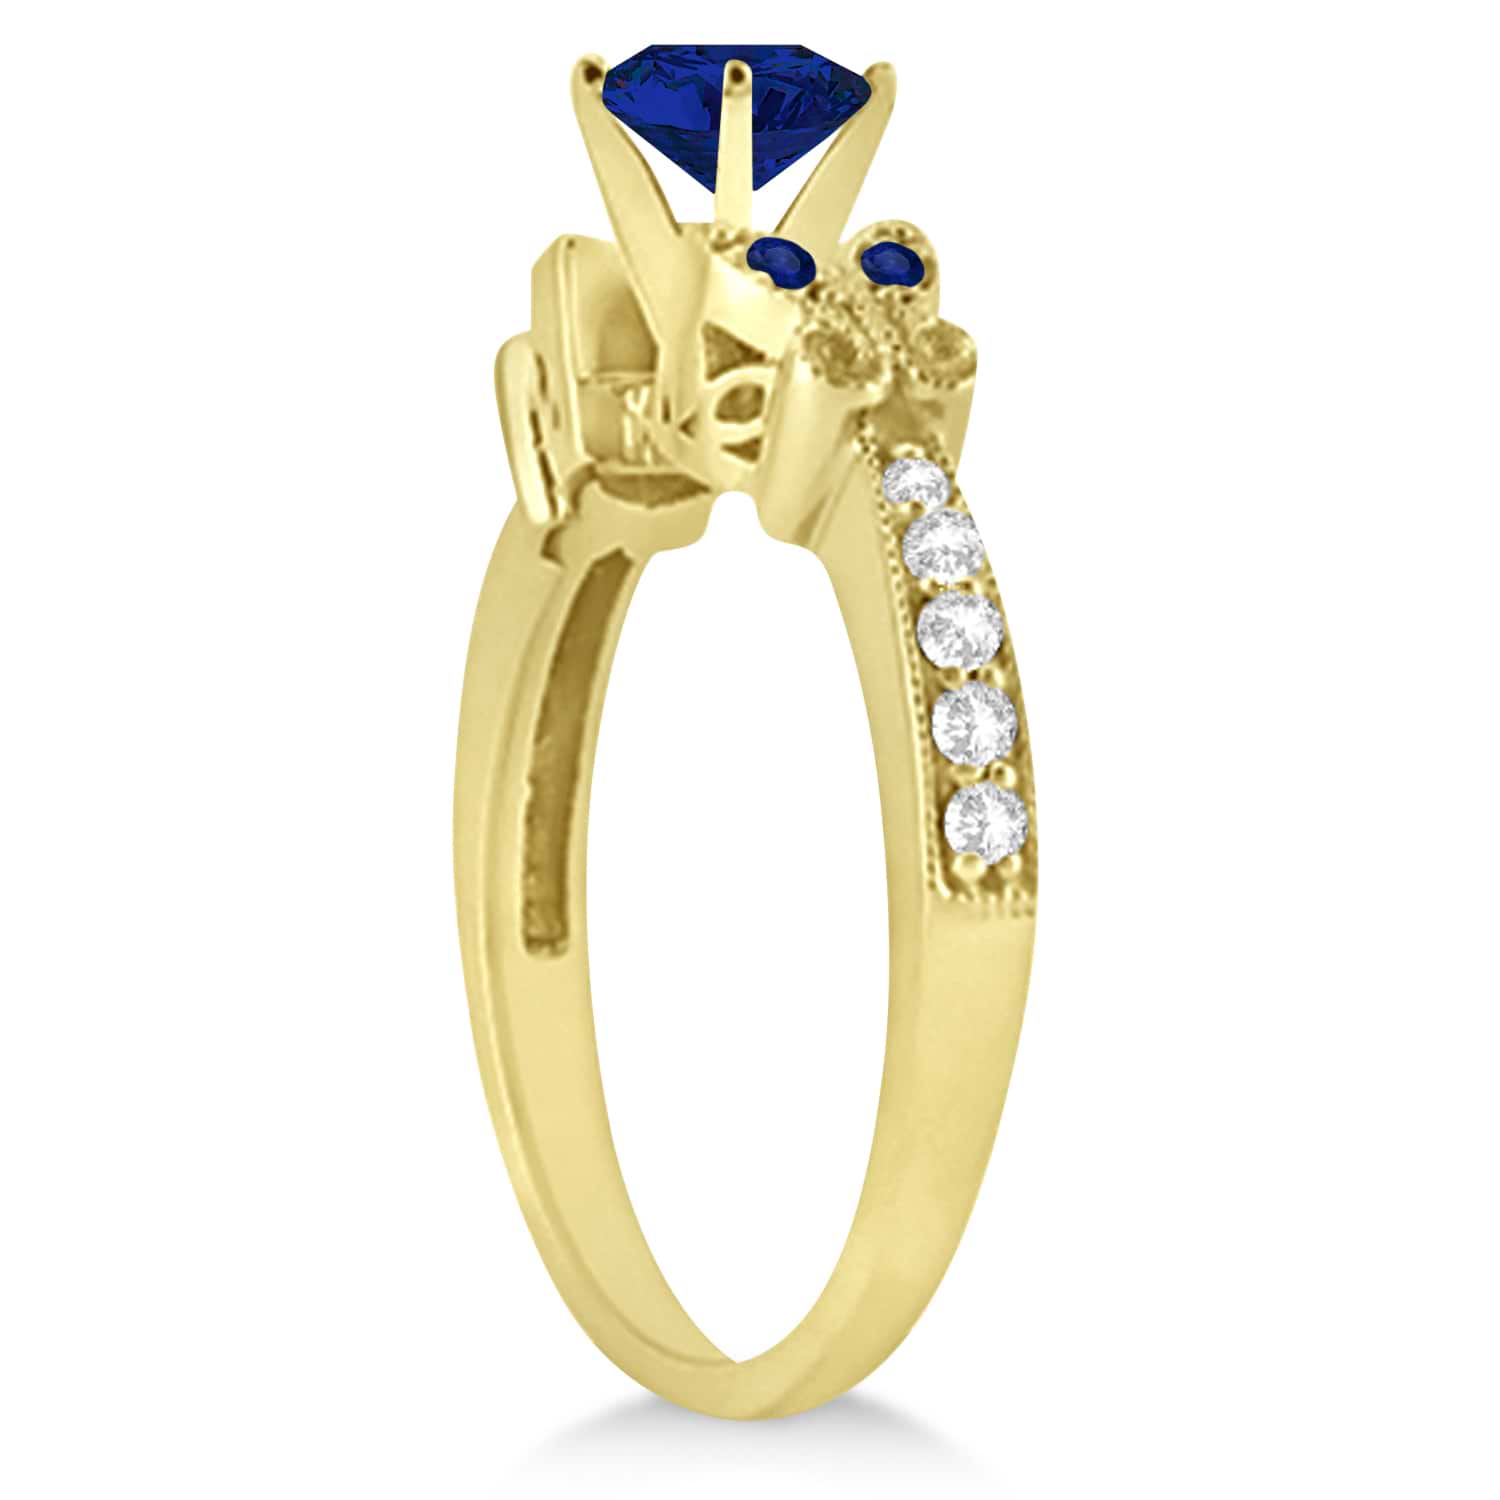 Butterfly Blue Sapphire & Diamond Engagement Ring 14K Yellow Gold 1.28ct